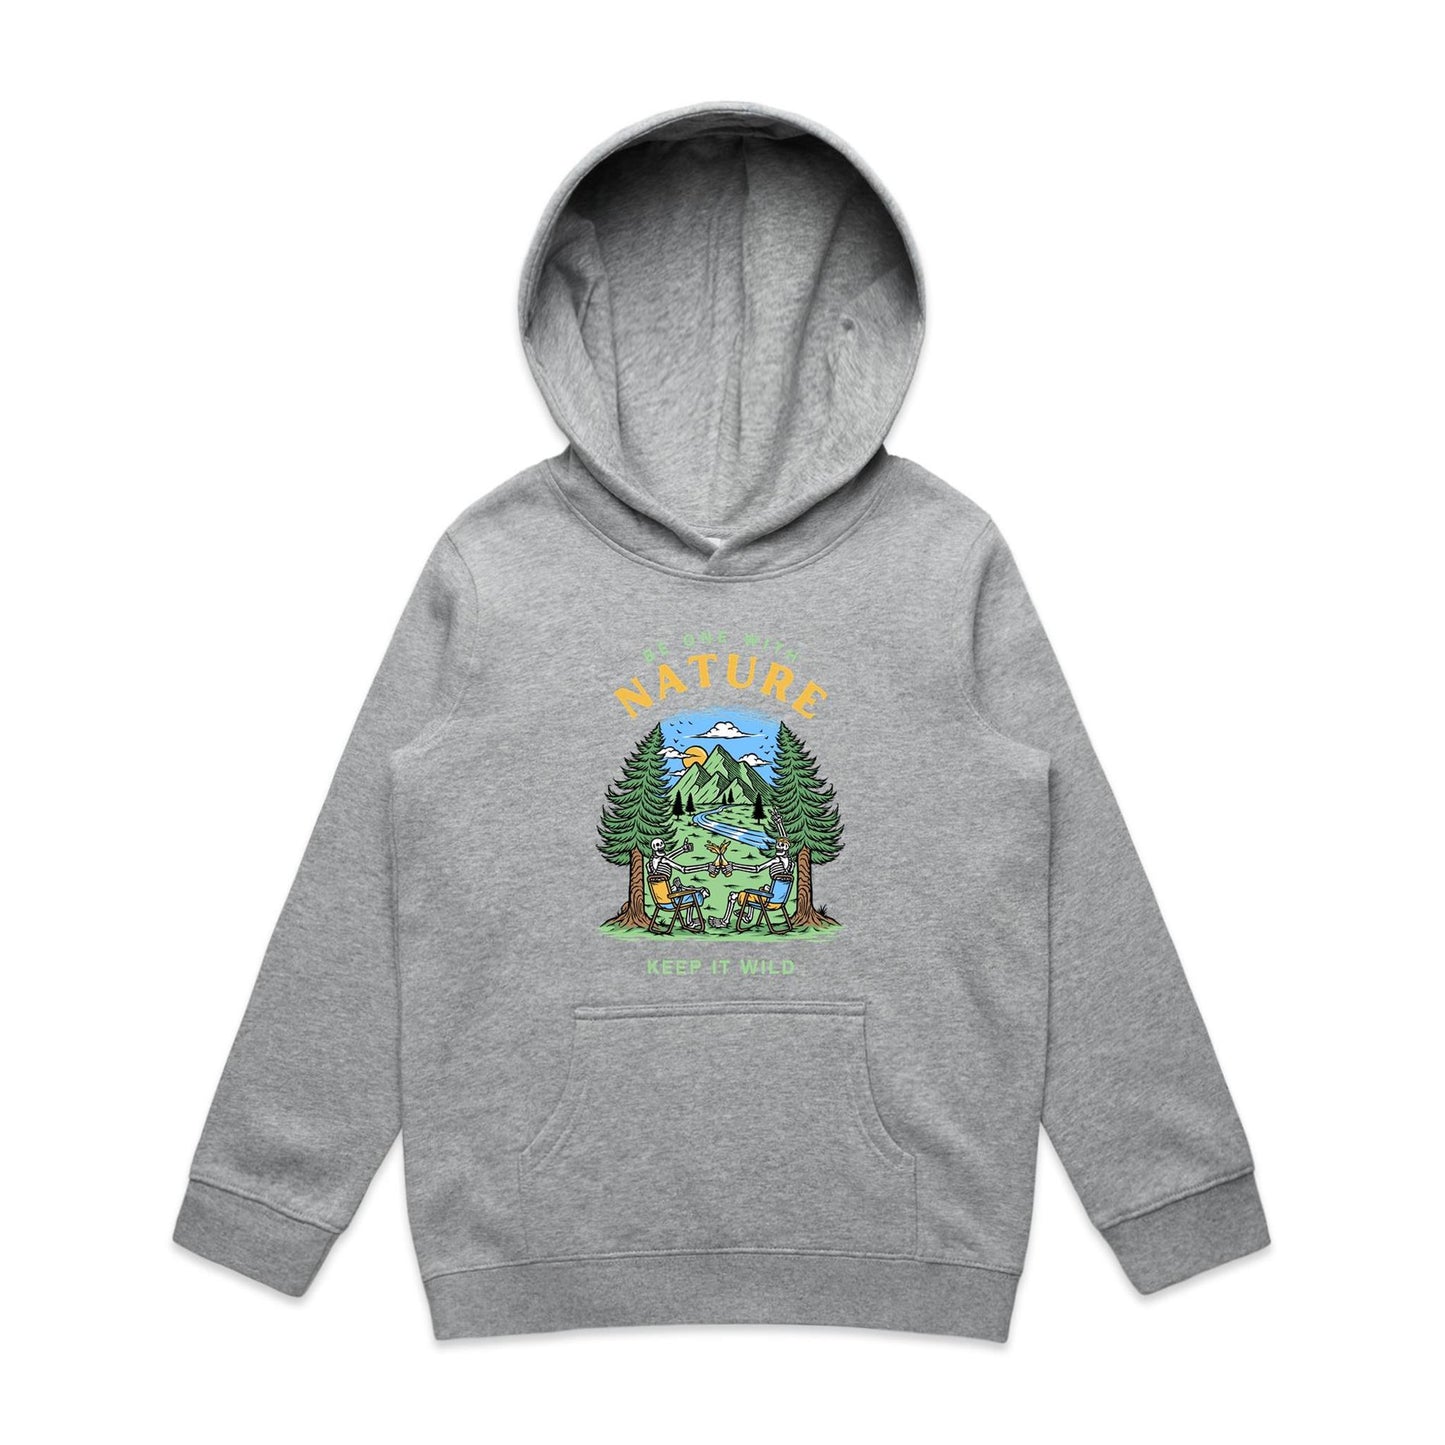 Be One With Nature, Skeleton - Youth Supply Hood Grey Marle Kids Hoodie Environment Summer